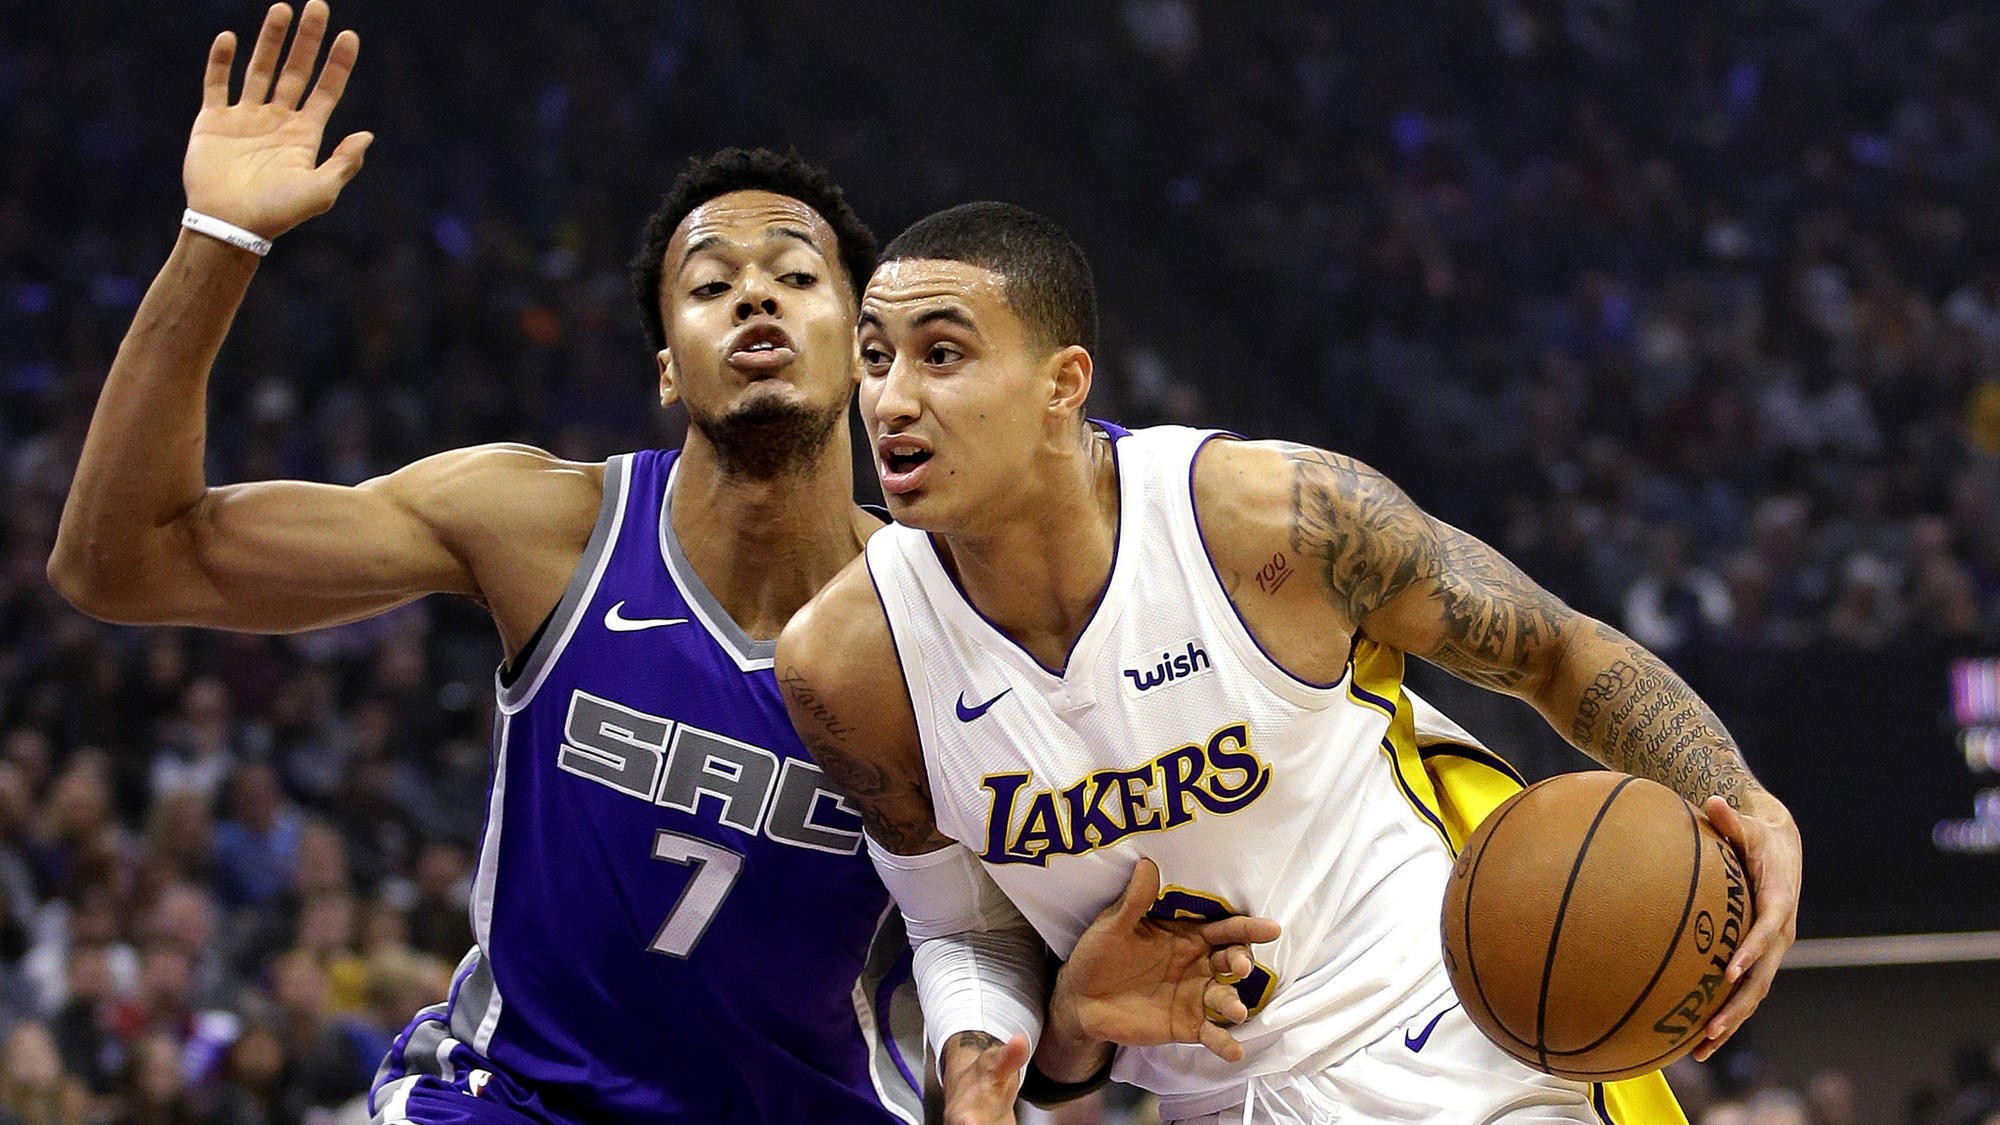 Kyle Kuzma doesn't play against Warriors because of back spasms.